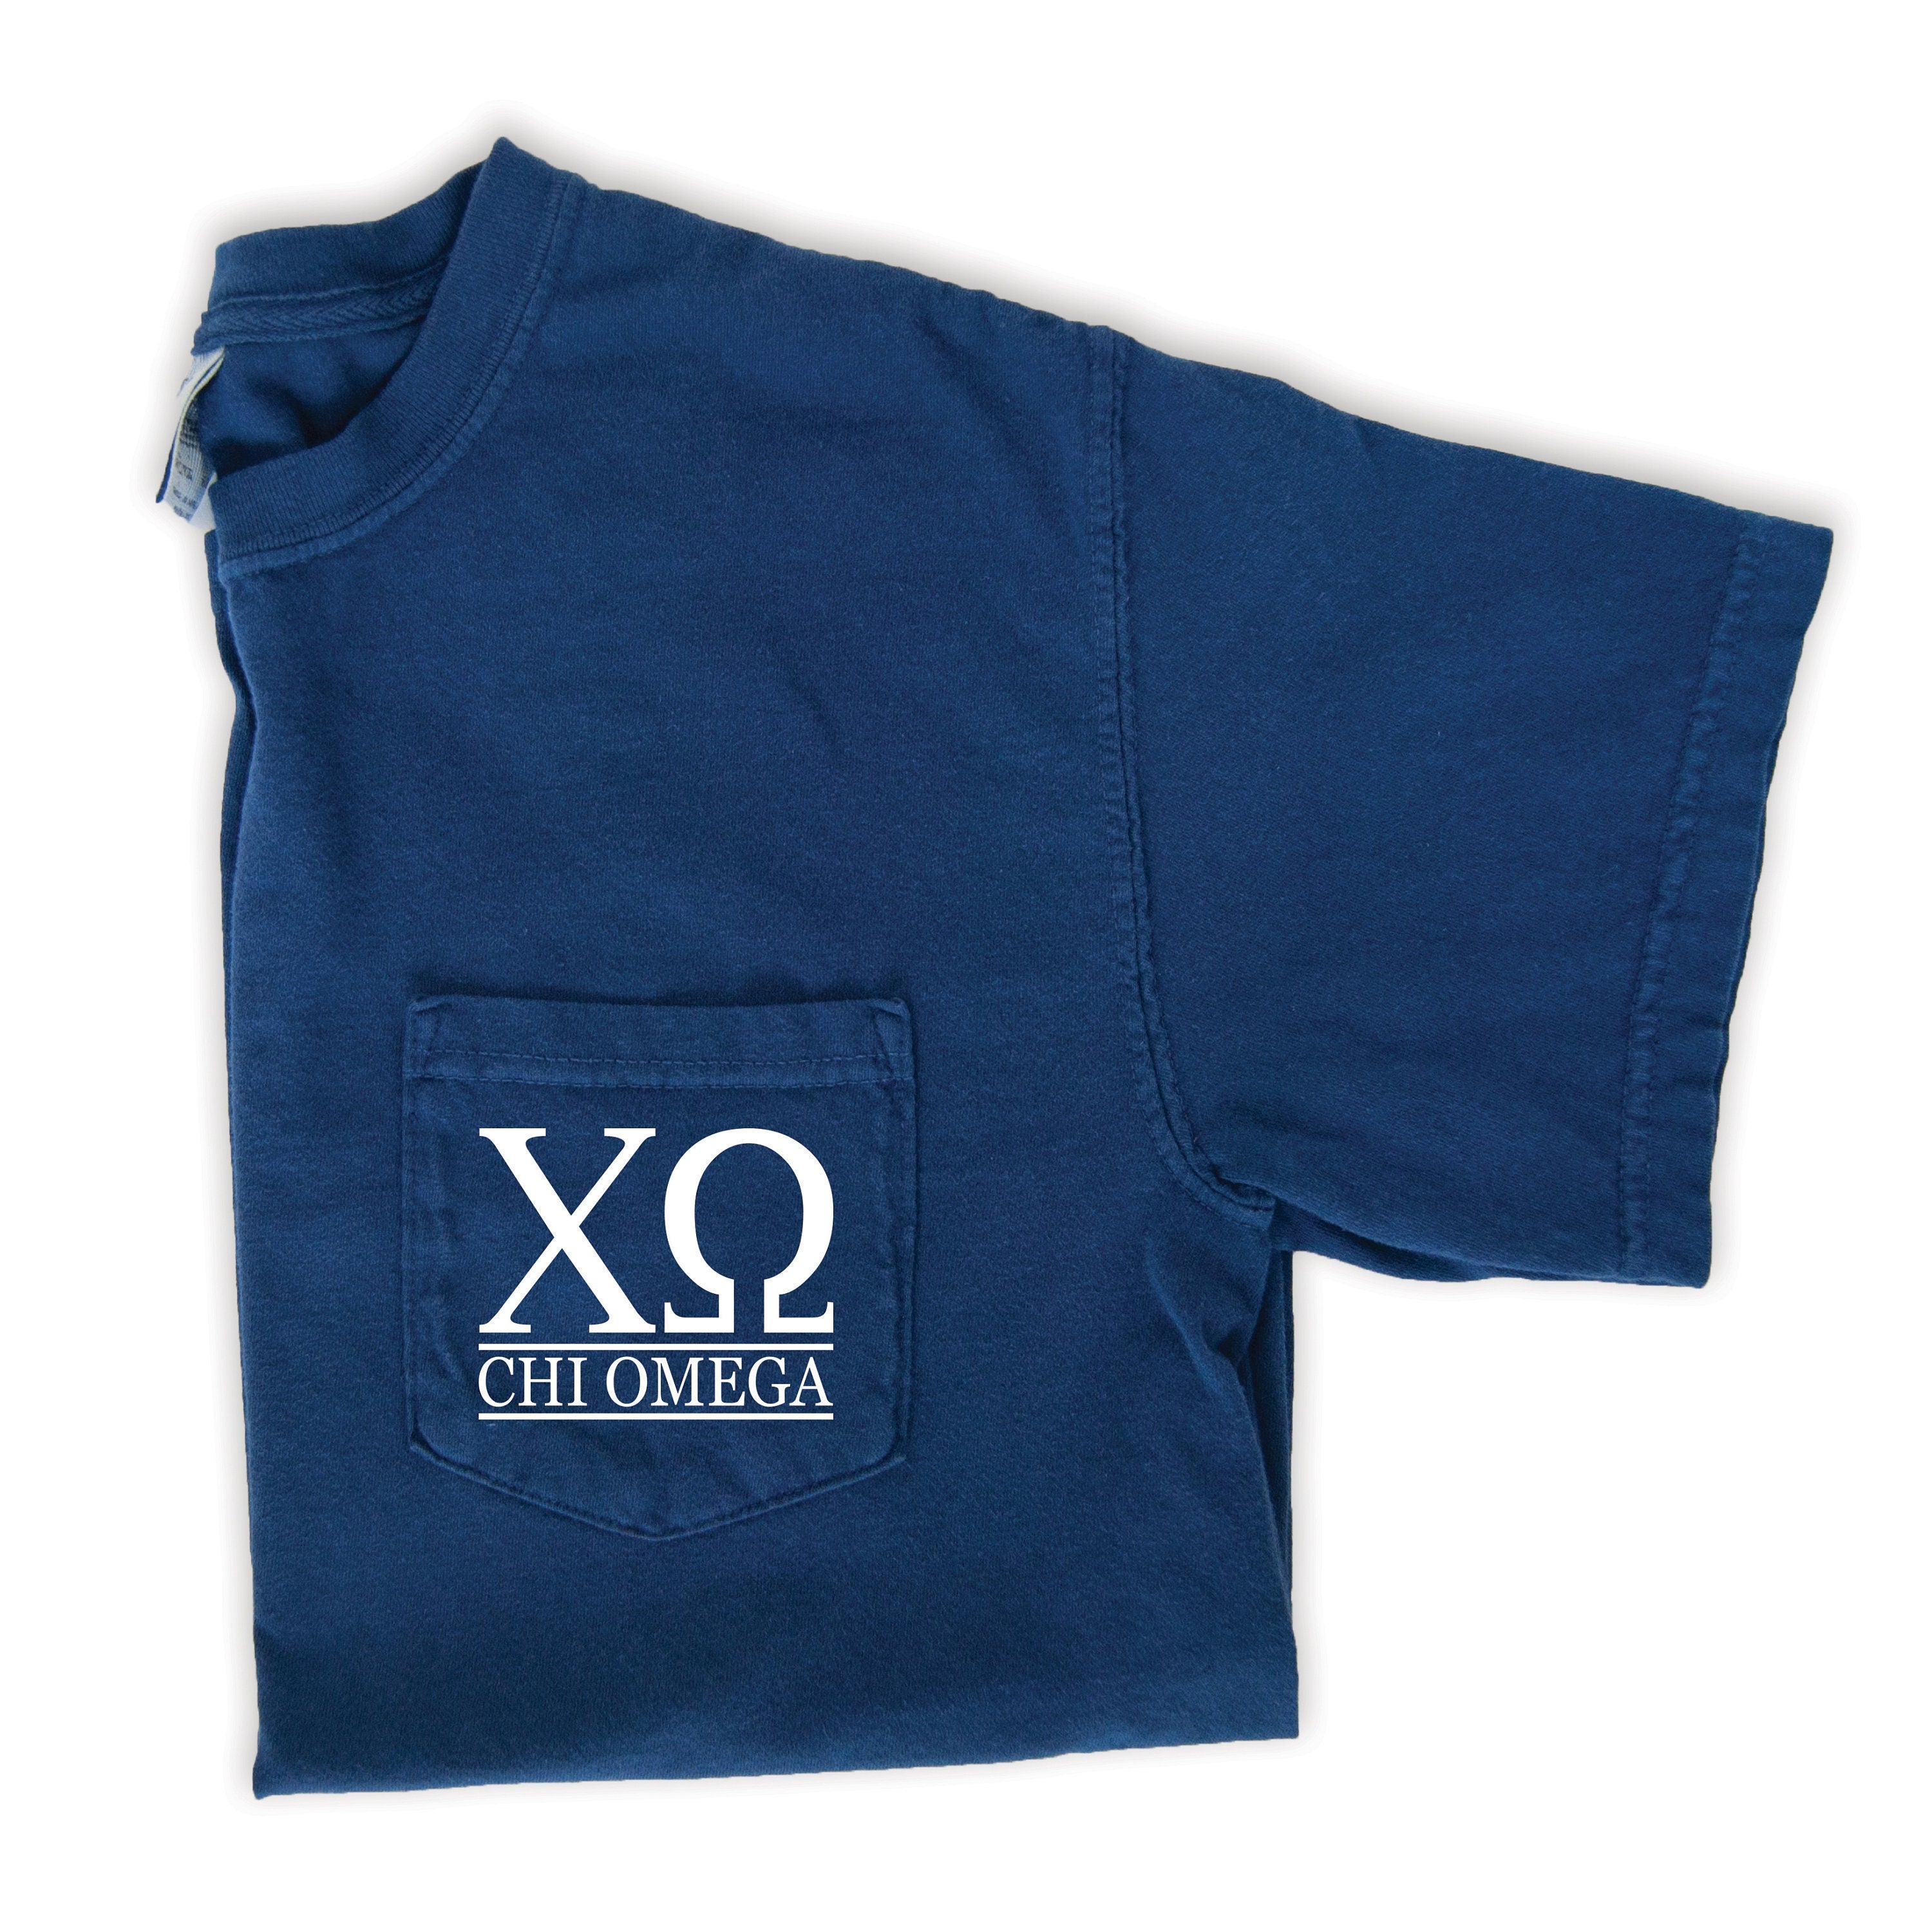 Chi Omega Block Letters T-Shirt - Navy - Go Greek Chic